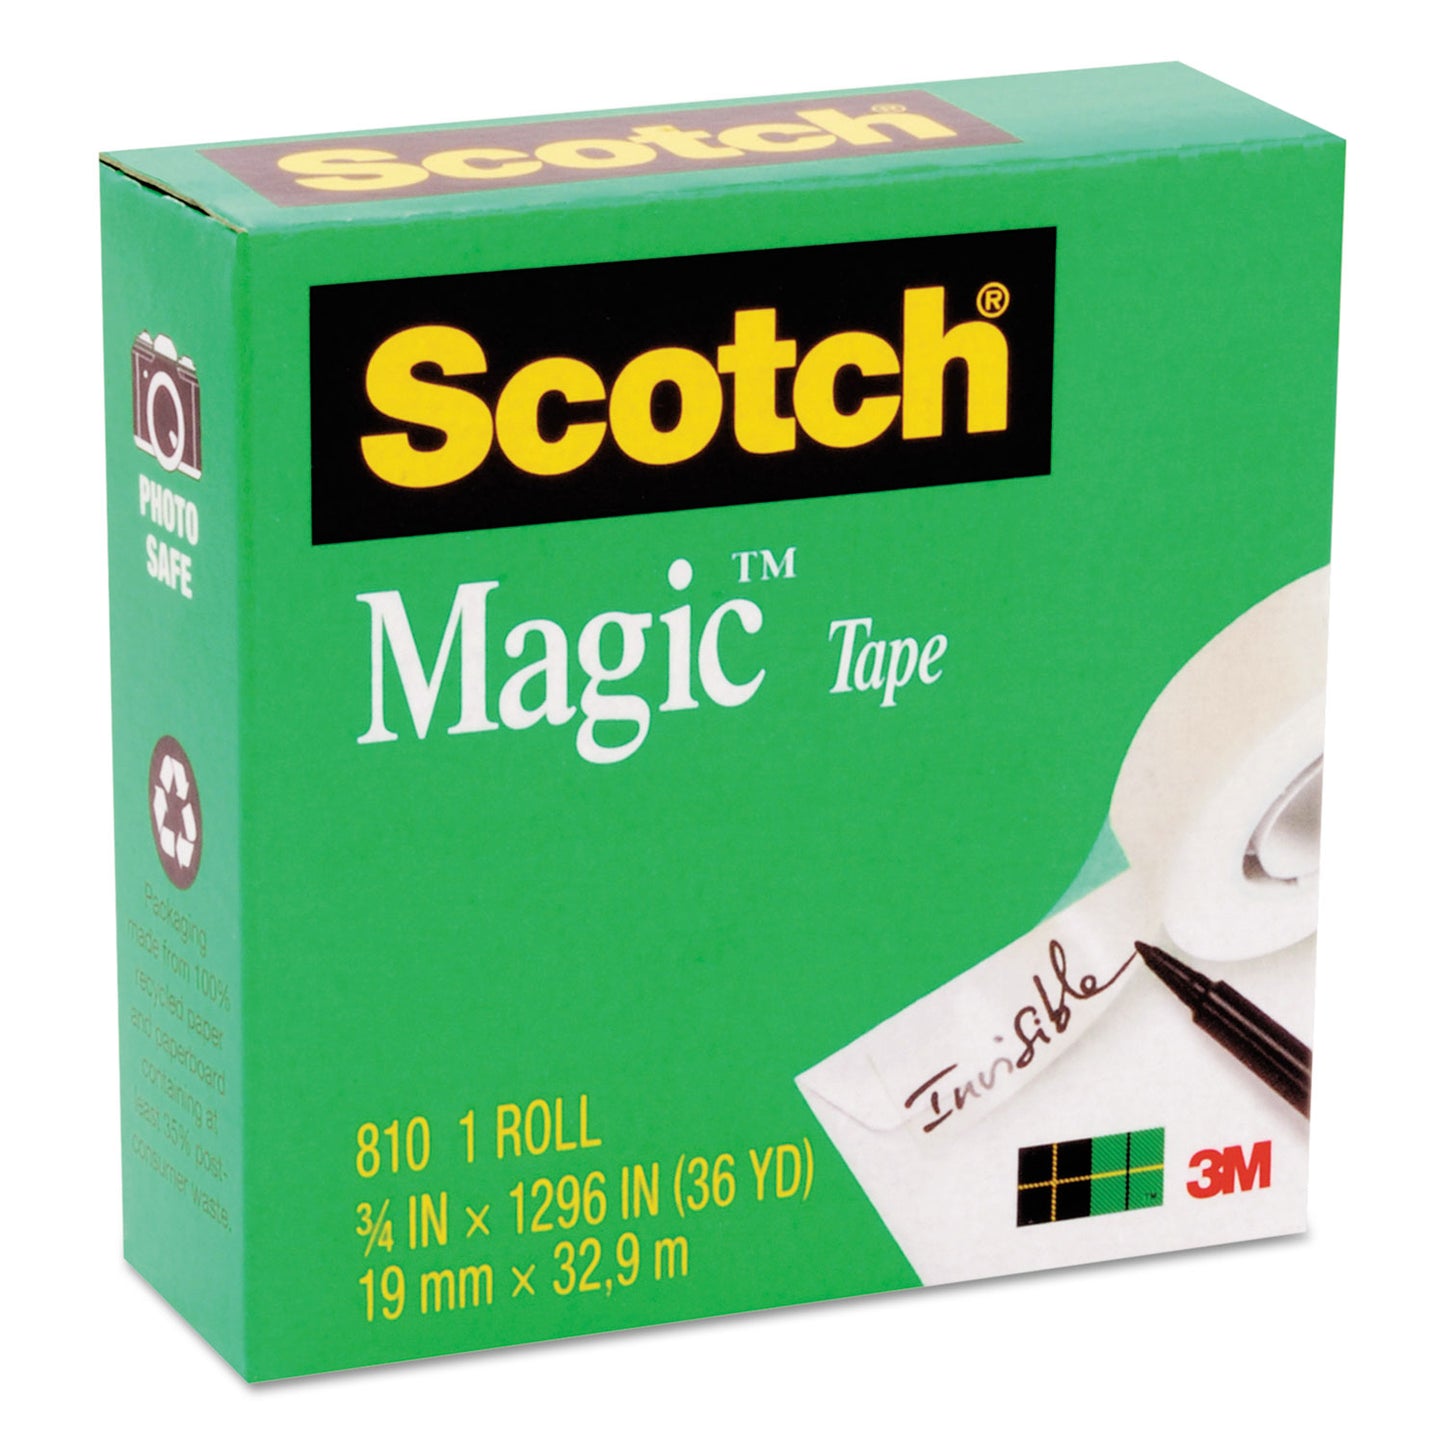 Magic Tape Refill, 1" Core, 0.75" x 83.33 ft, Clear, Offices, Homes and Schools